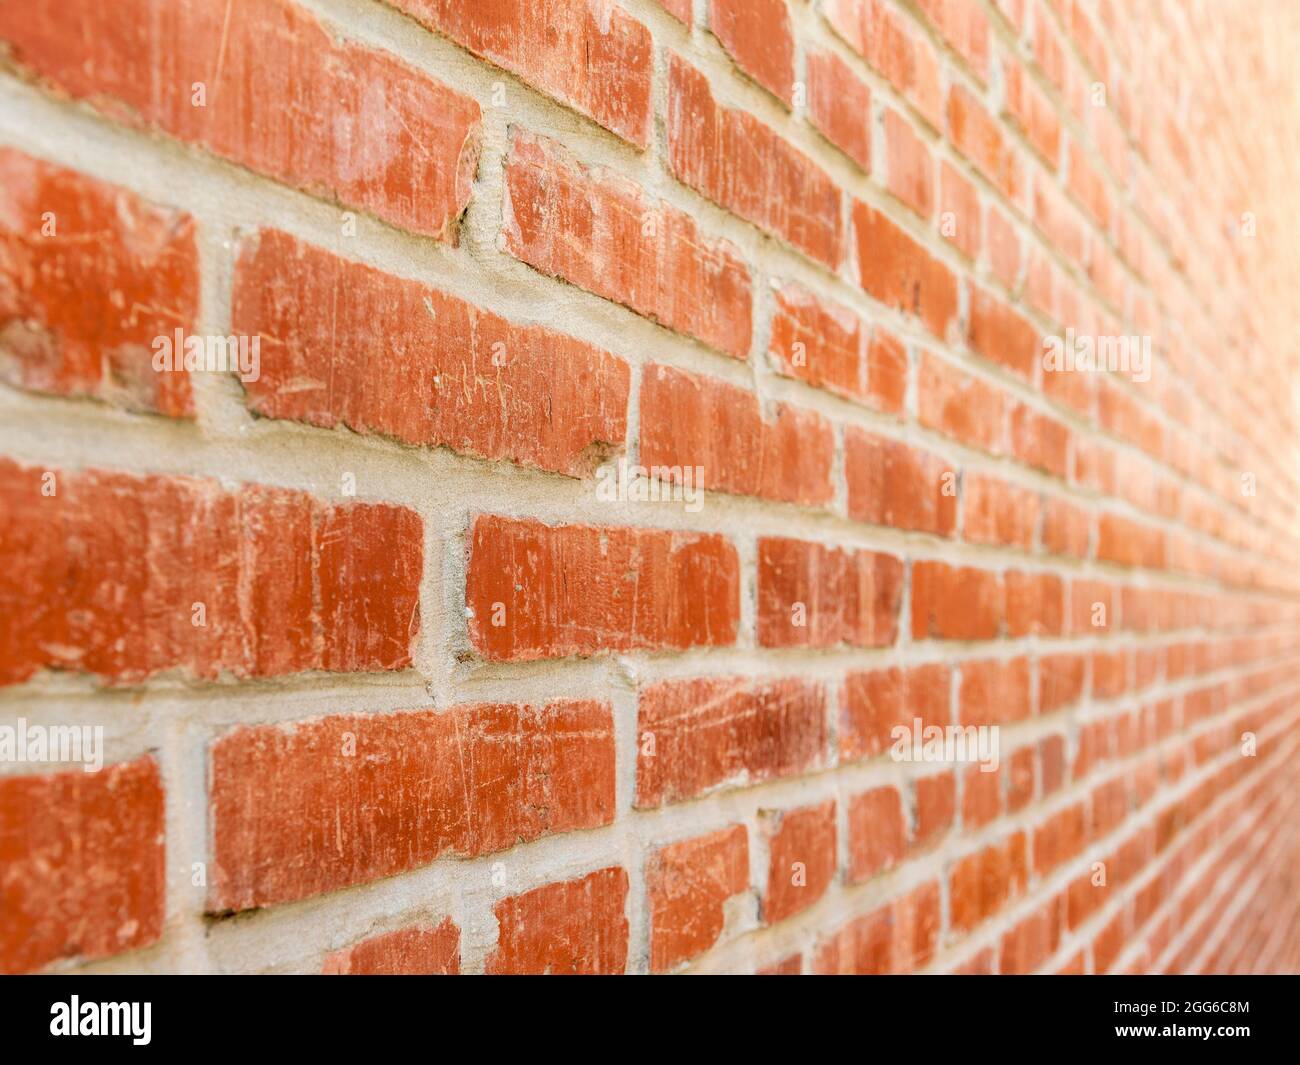 Close-up diminishing perspective of red brick wall from left to right. Stock Photo